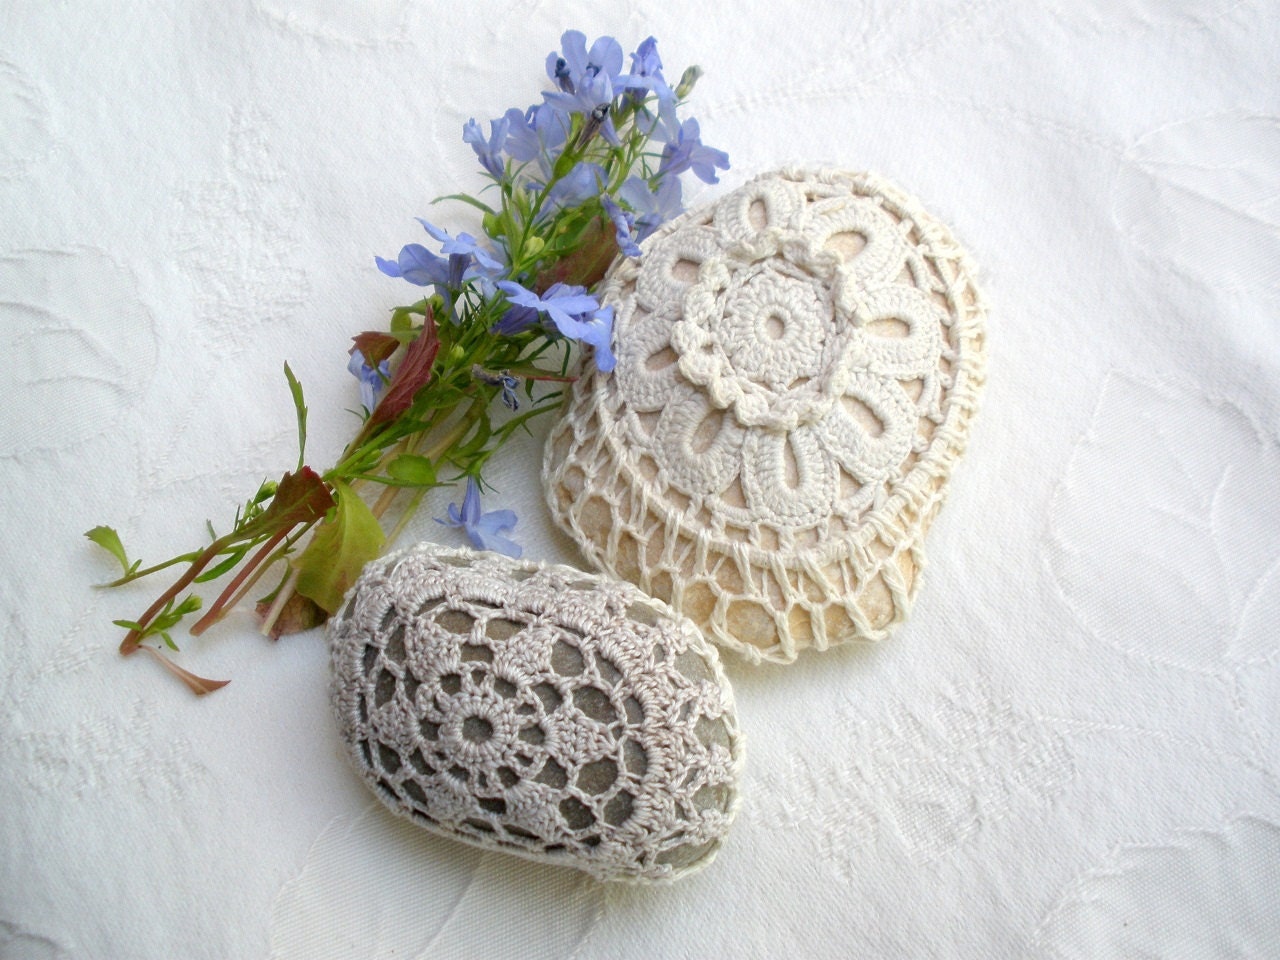 Crochet Two Nature decorated river pebble Stones, covered with vintage lace flower motif, hand made, mintook..